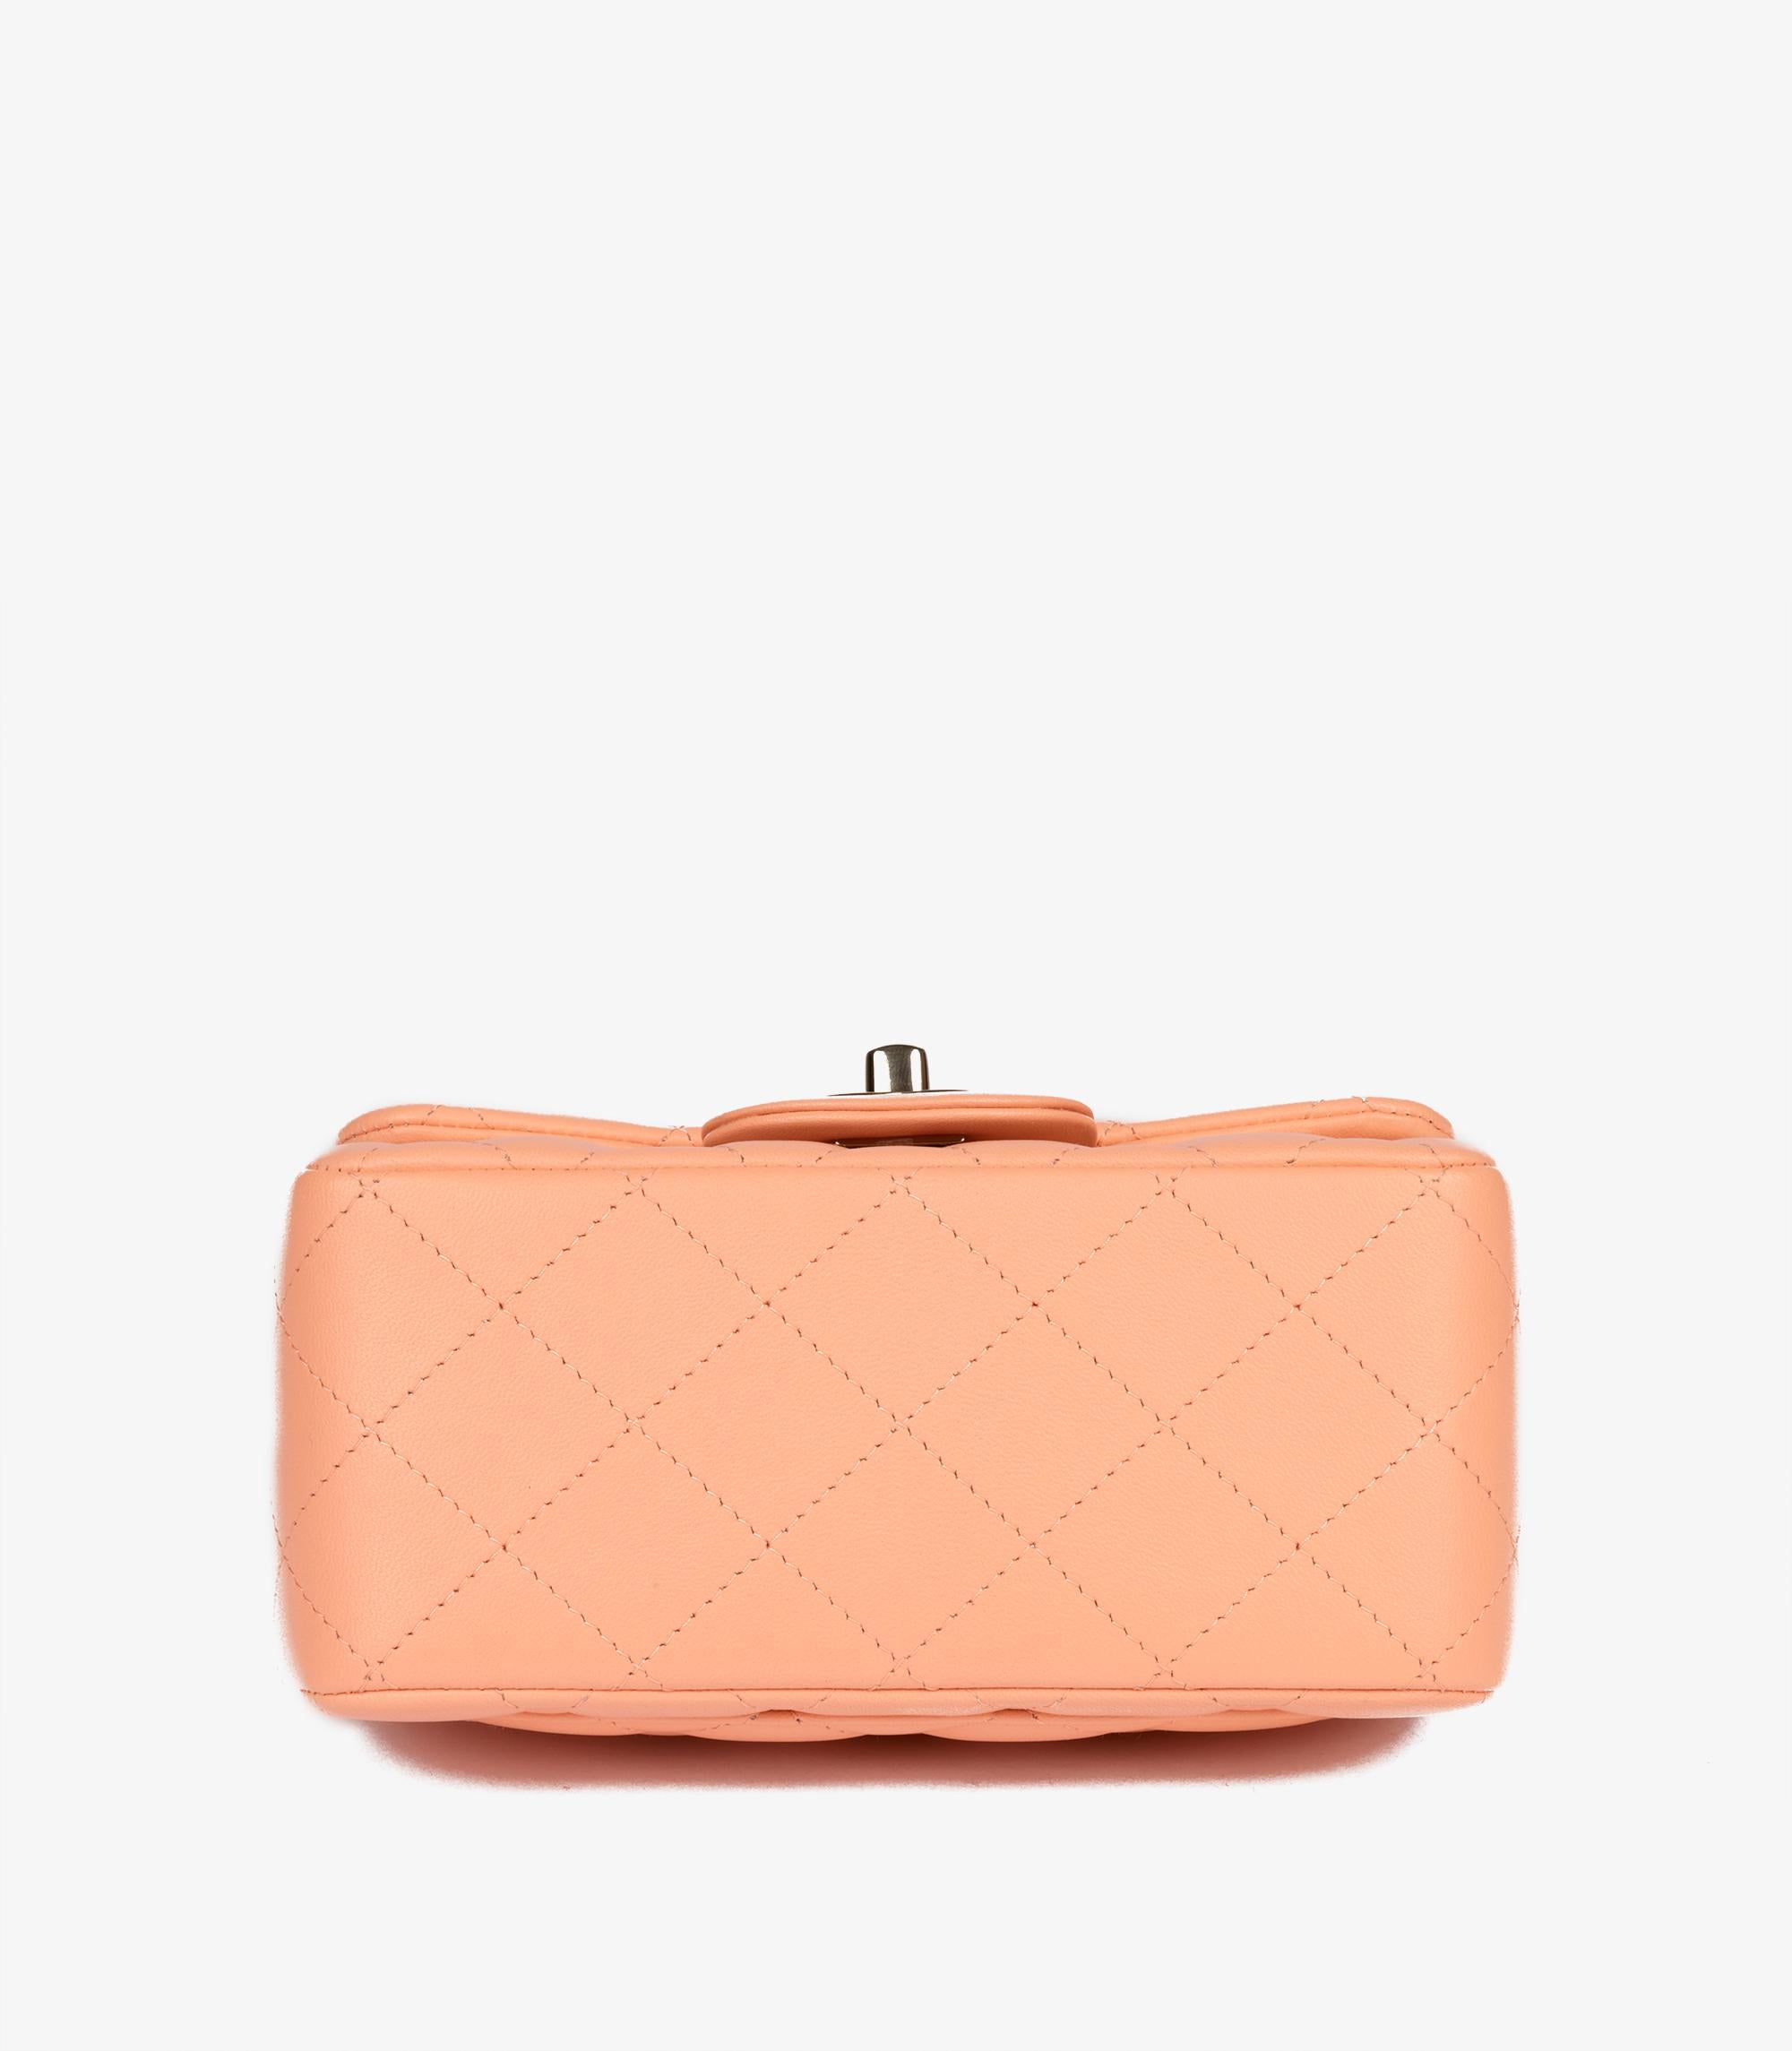 Chanel Salmon Peach Quilted Lambskin Square Mini Flap Bag For Sale 3